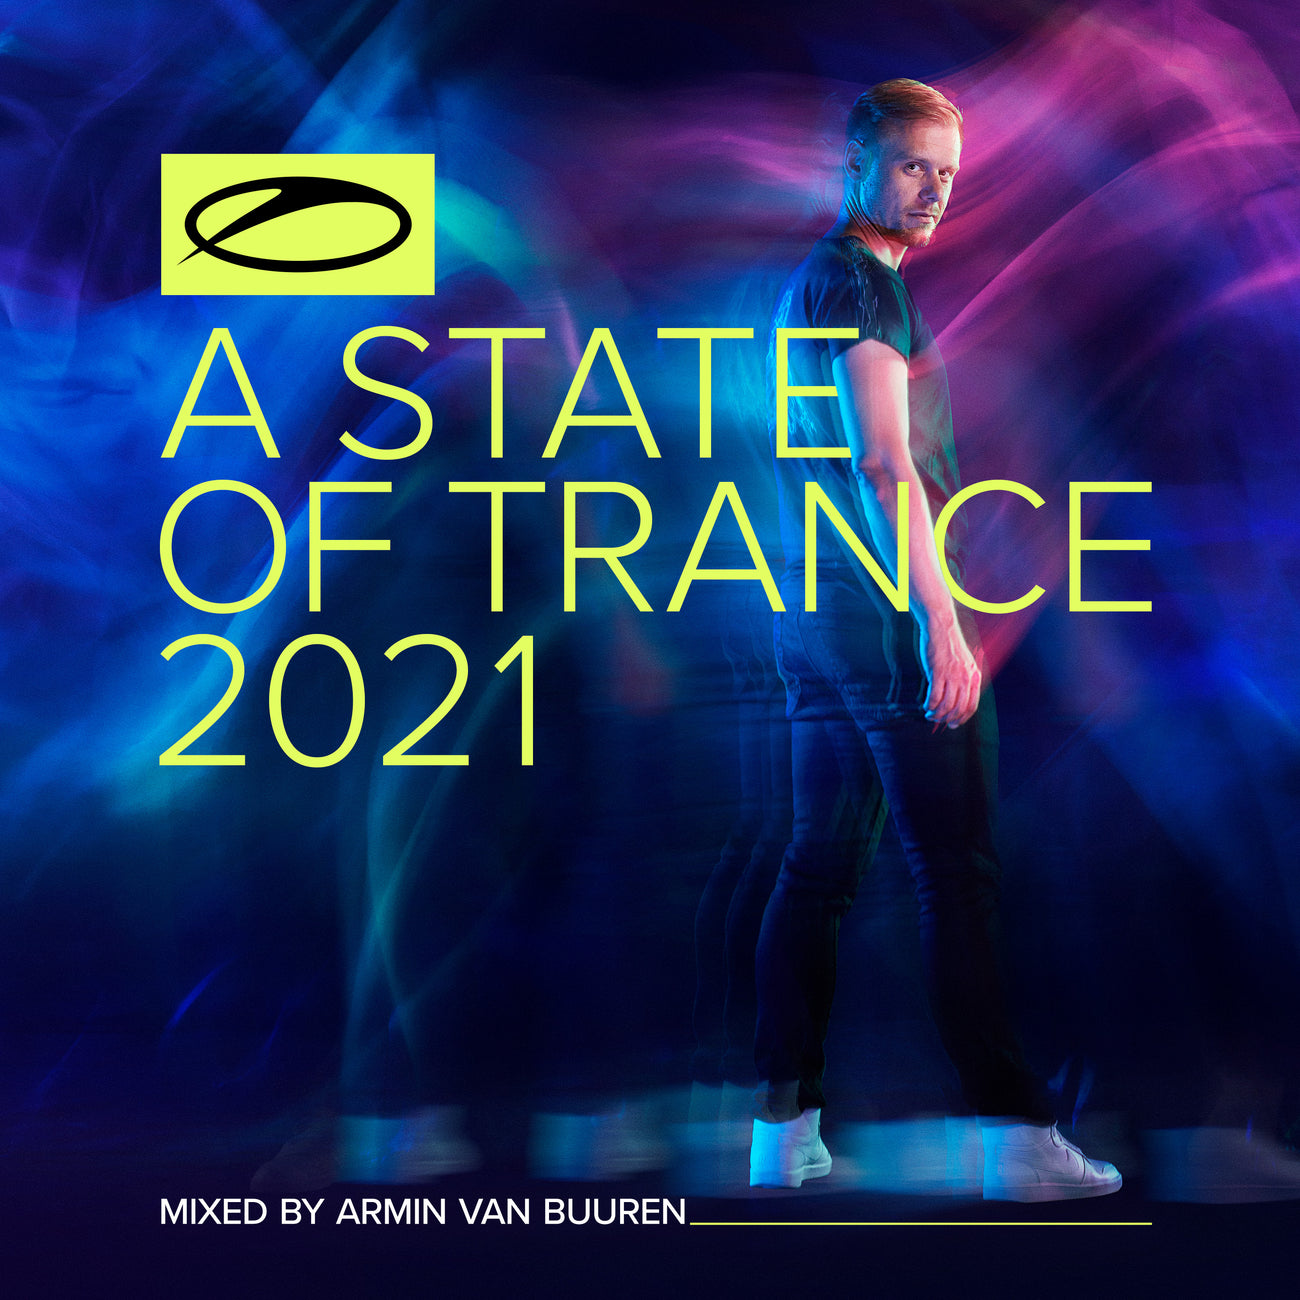 A State Of Trance 2021 (Mixed by Armin van Buuren)